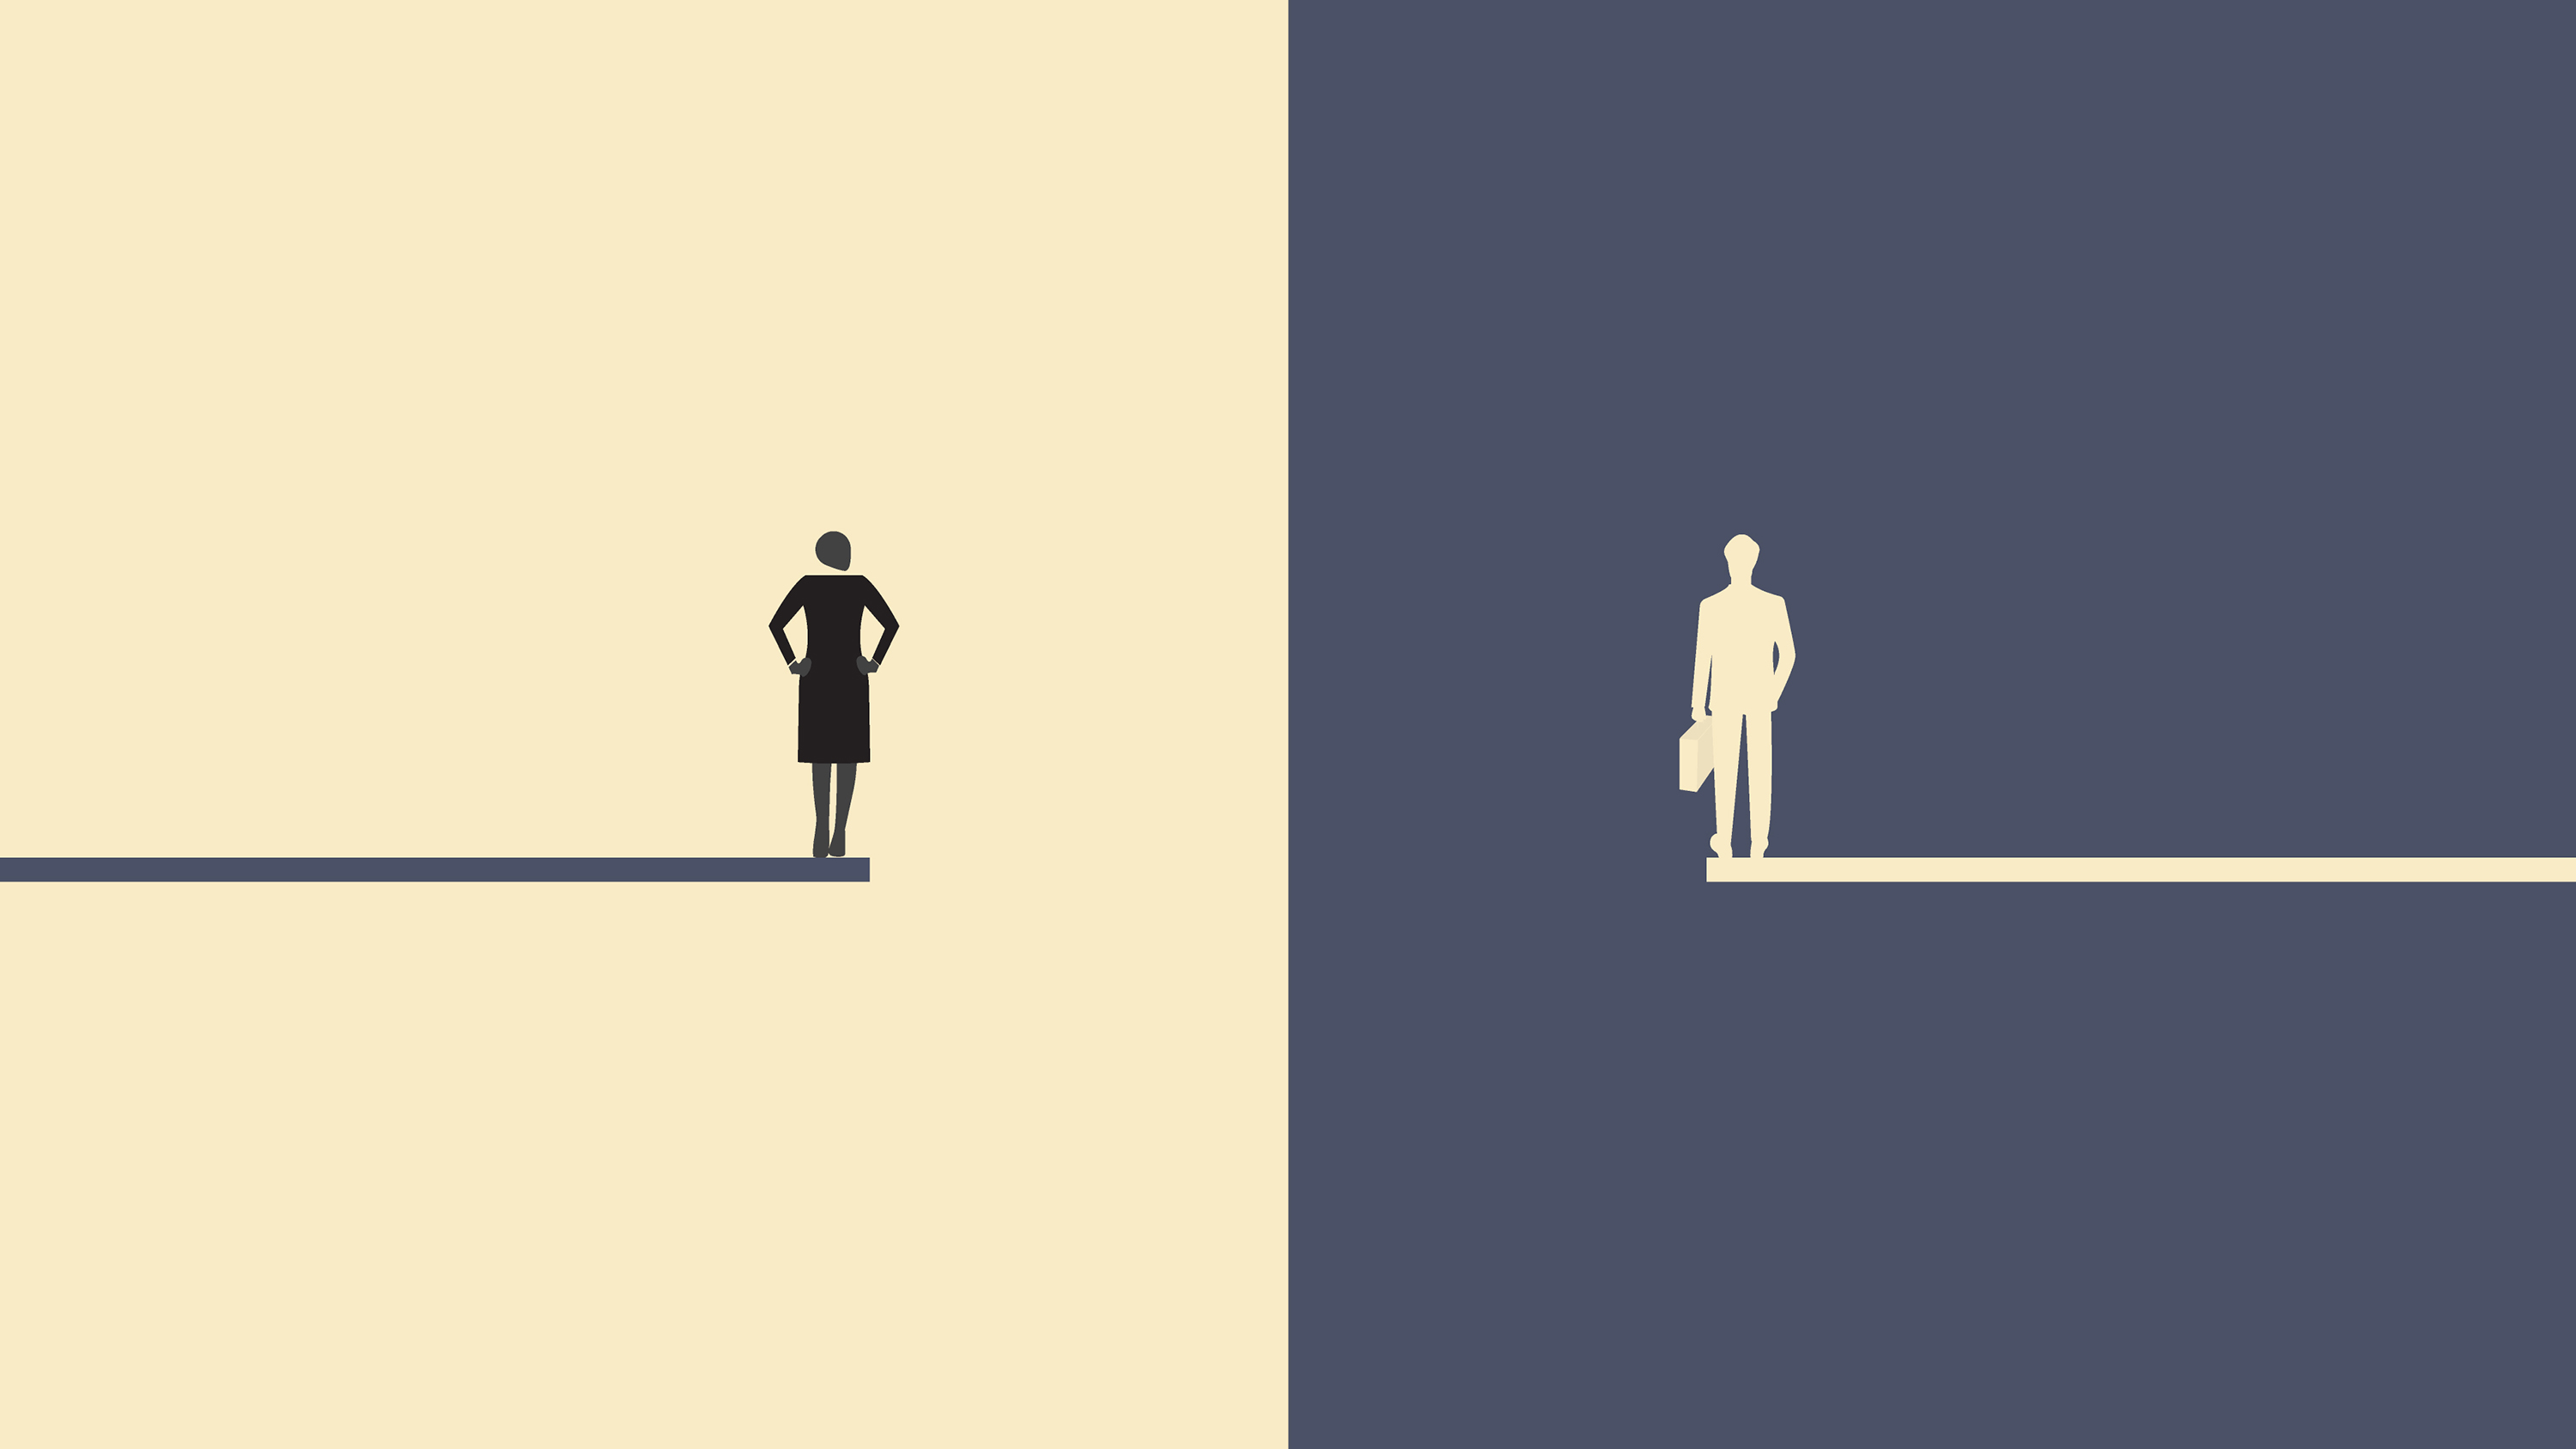 Silhouettes of a businessman and woman stand on contrasting colours